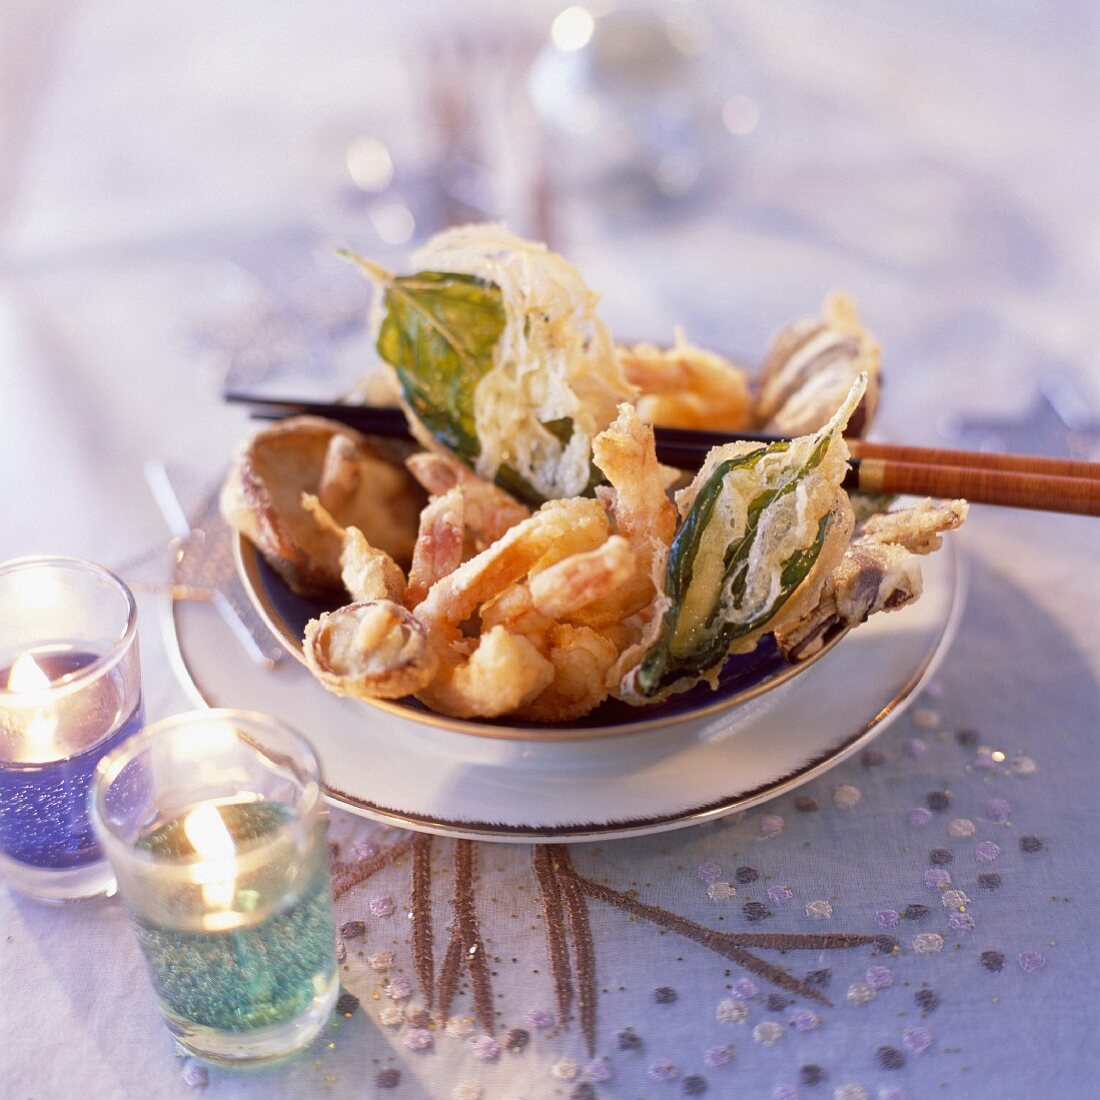 Vegetable tempura with herbs and prawns